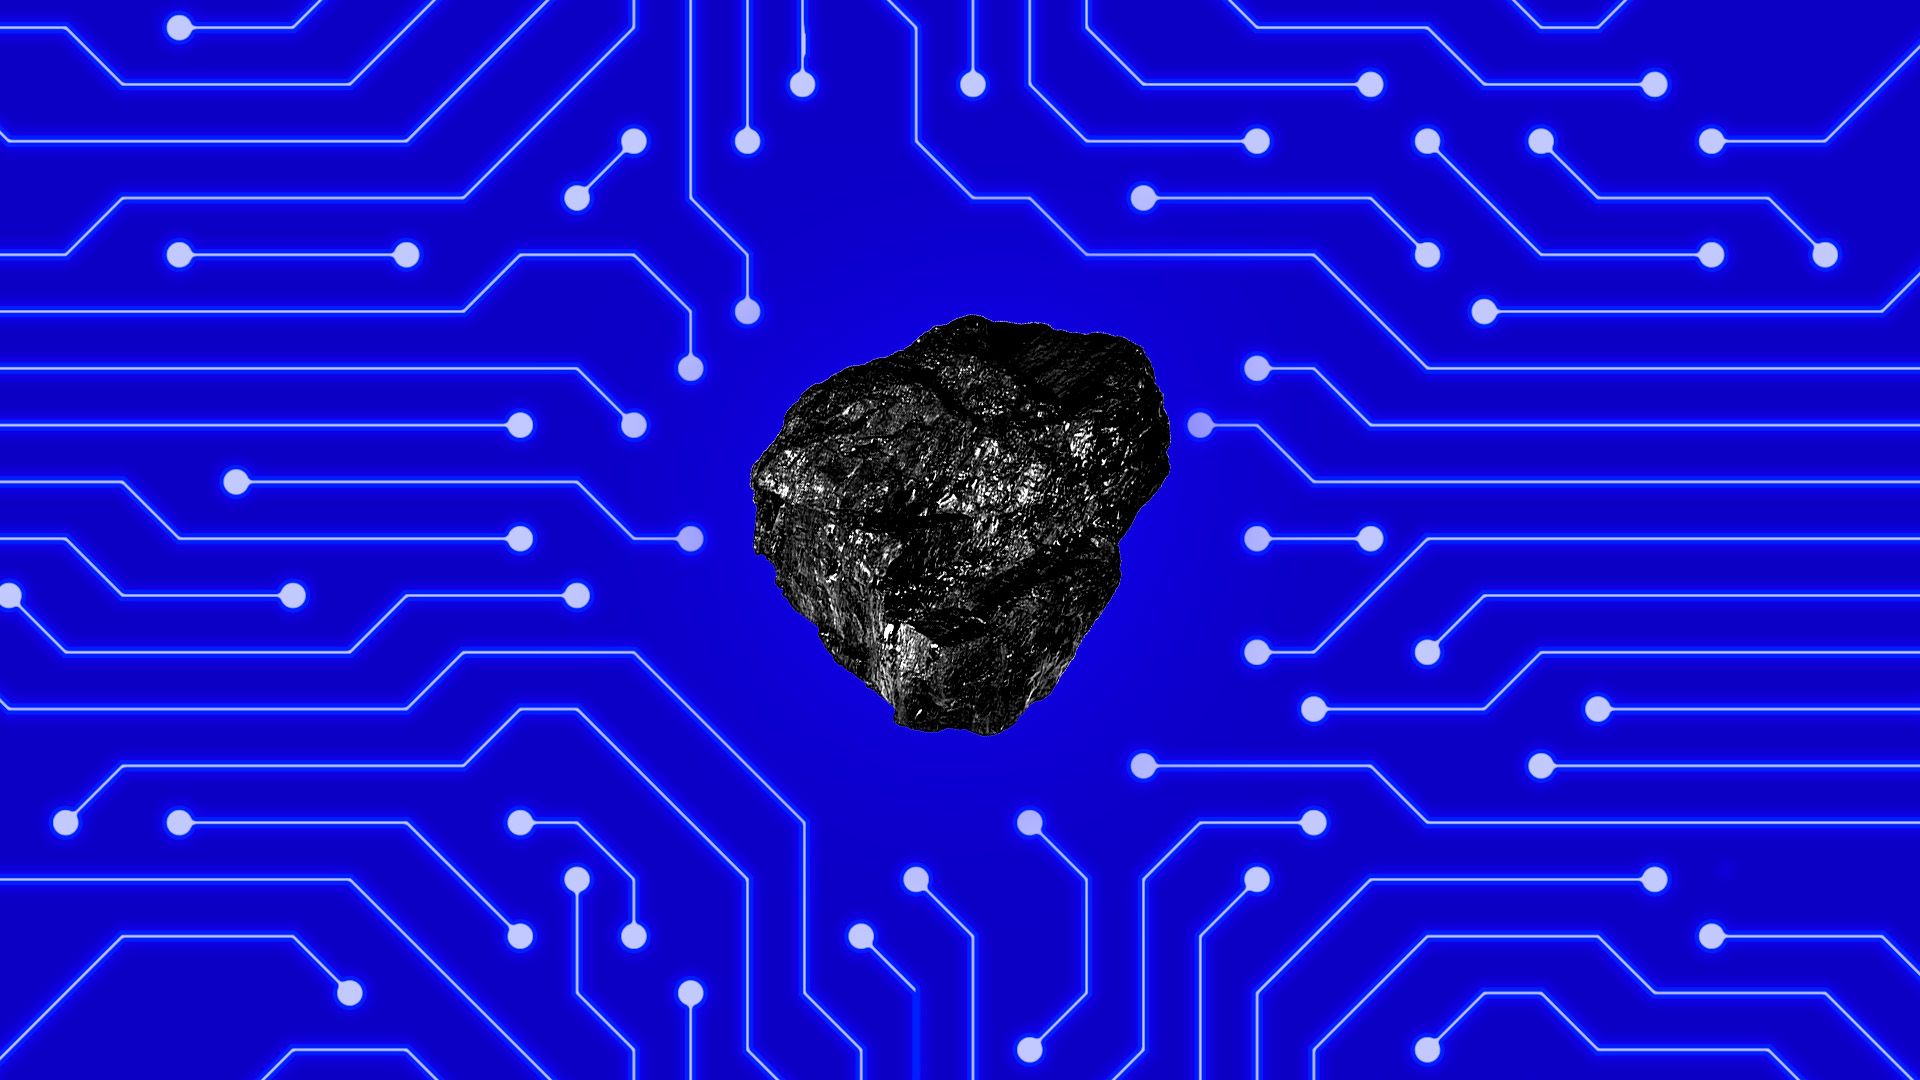 Block of coal surrounded by blue